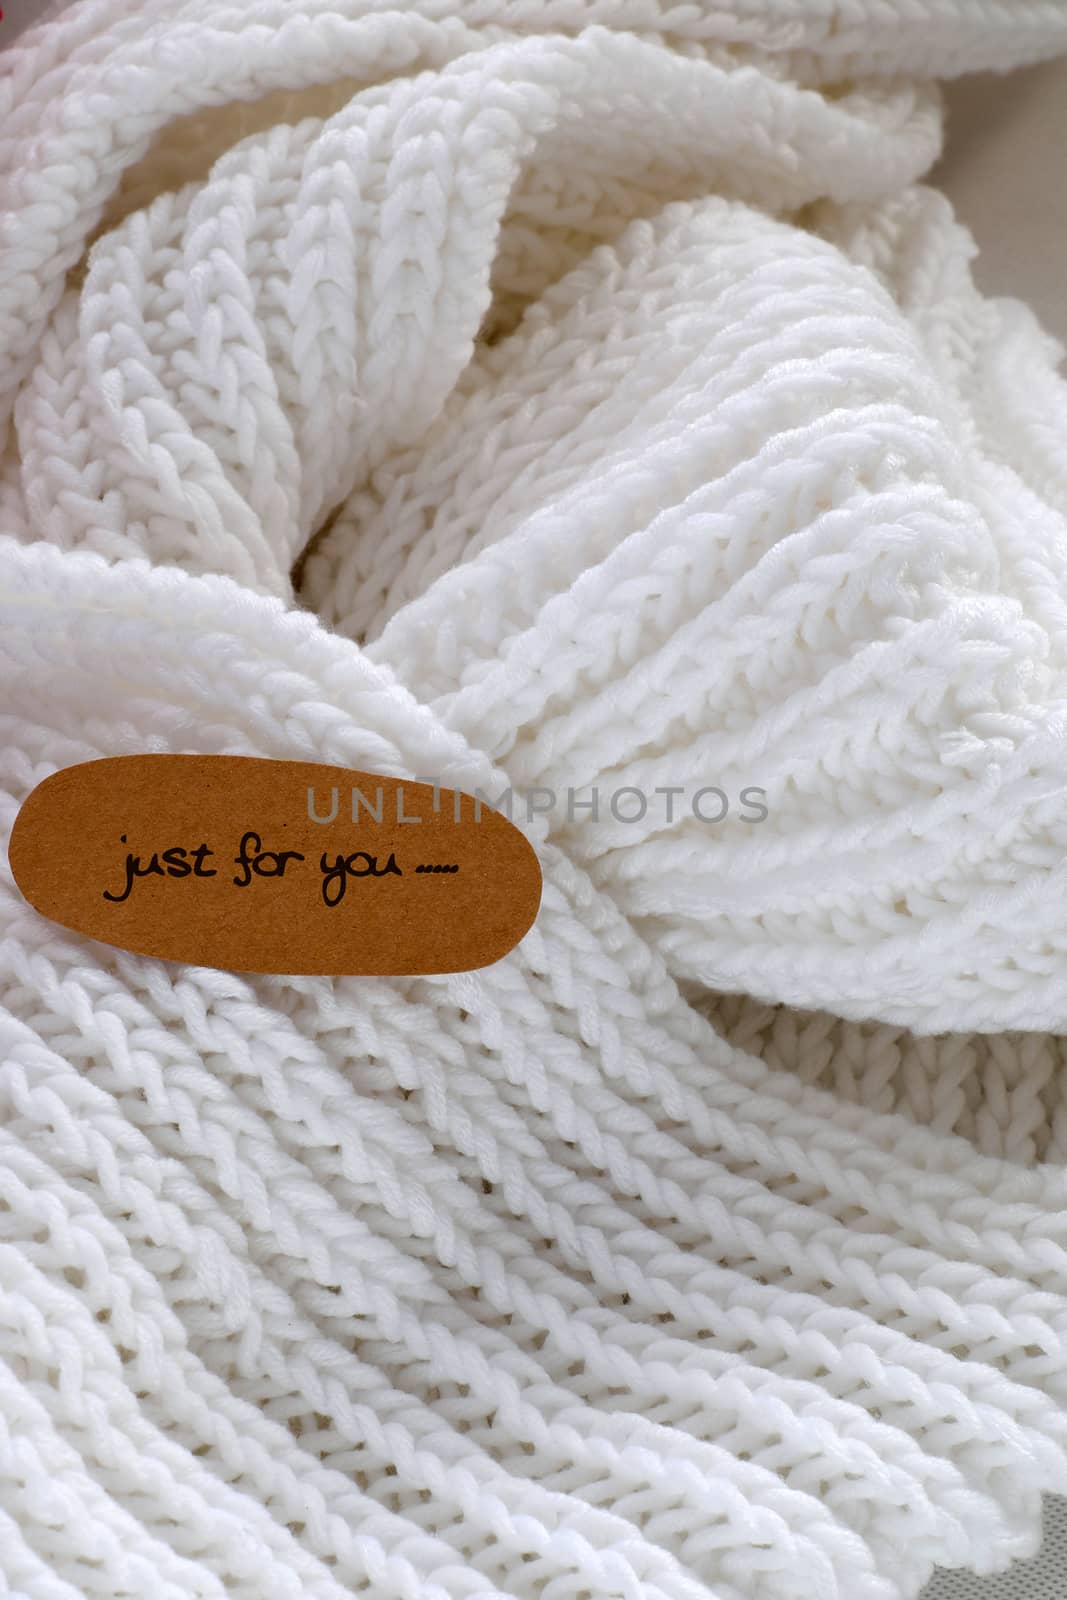 knit white scarf  warm in cold day by xuanhuongho